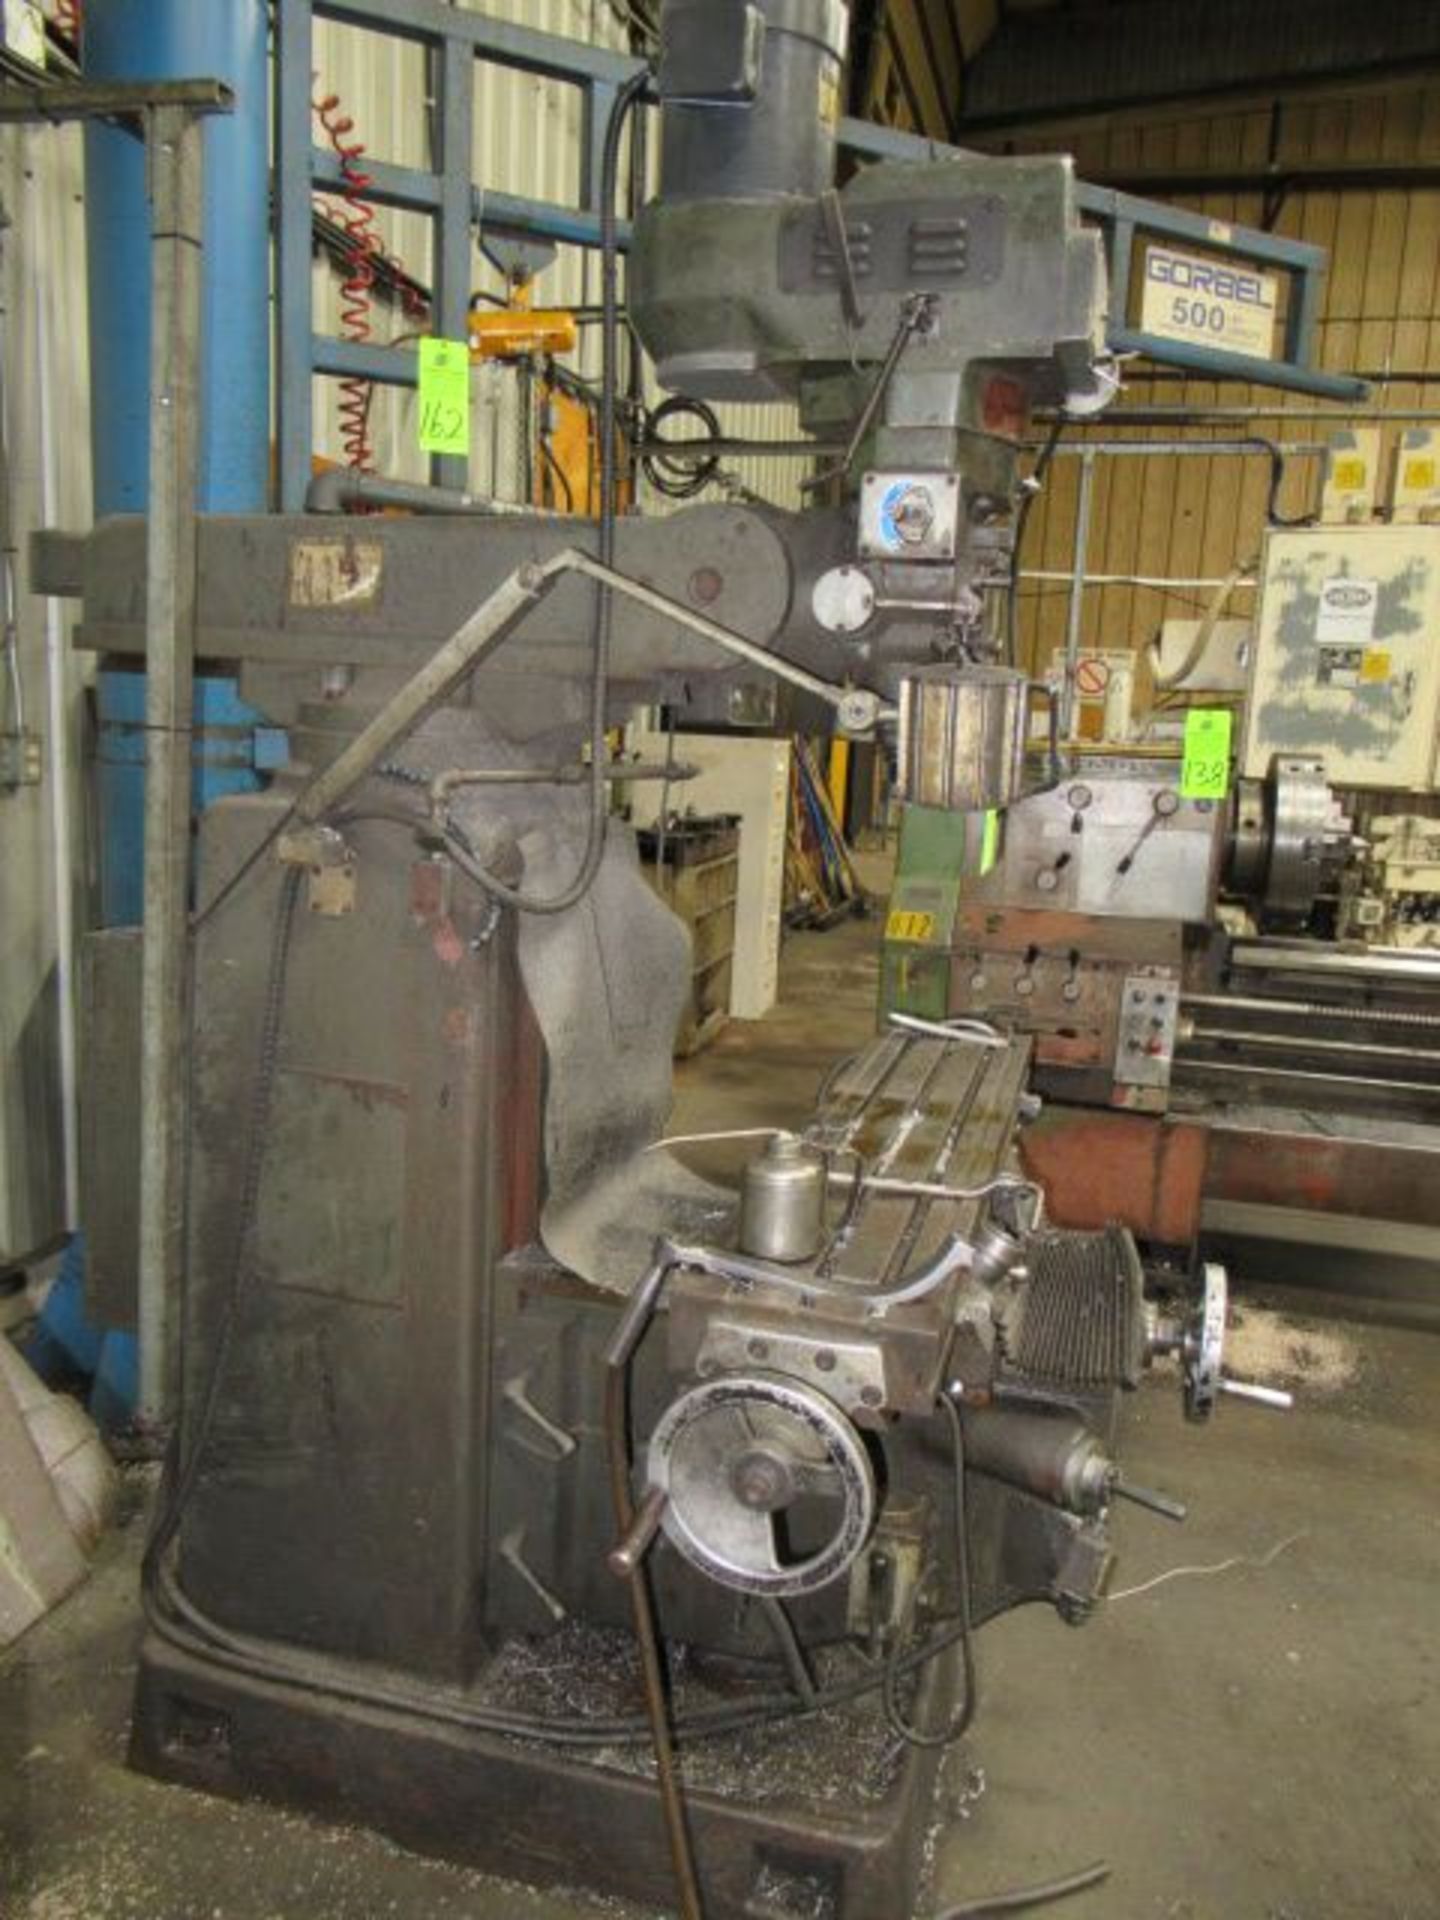 EAST LION 5 hp Vertical Mill, s/n 980203, w/ Power Feed Table ($900 Rigging Cost) - Image 3 of 3